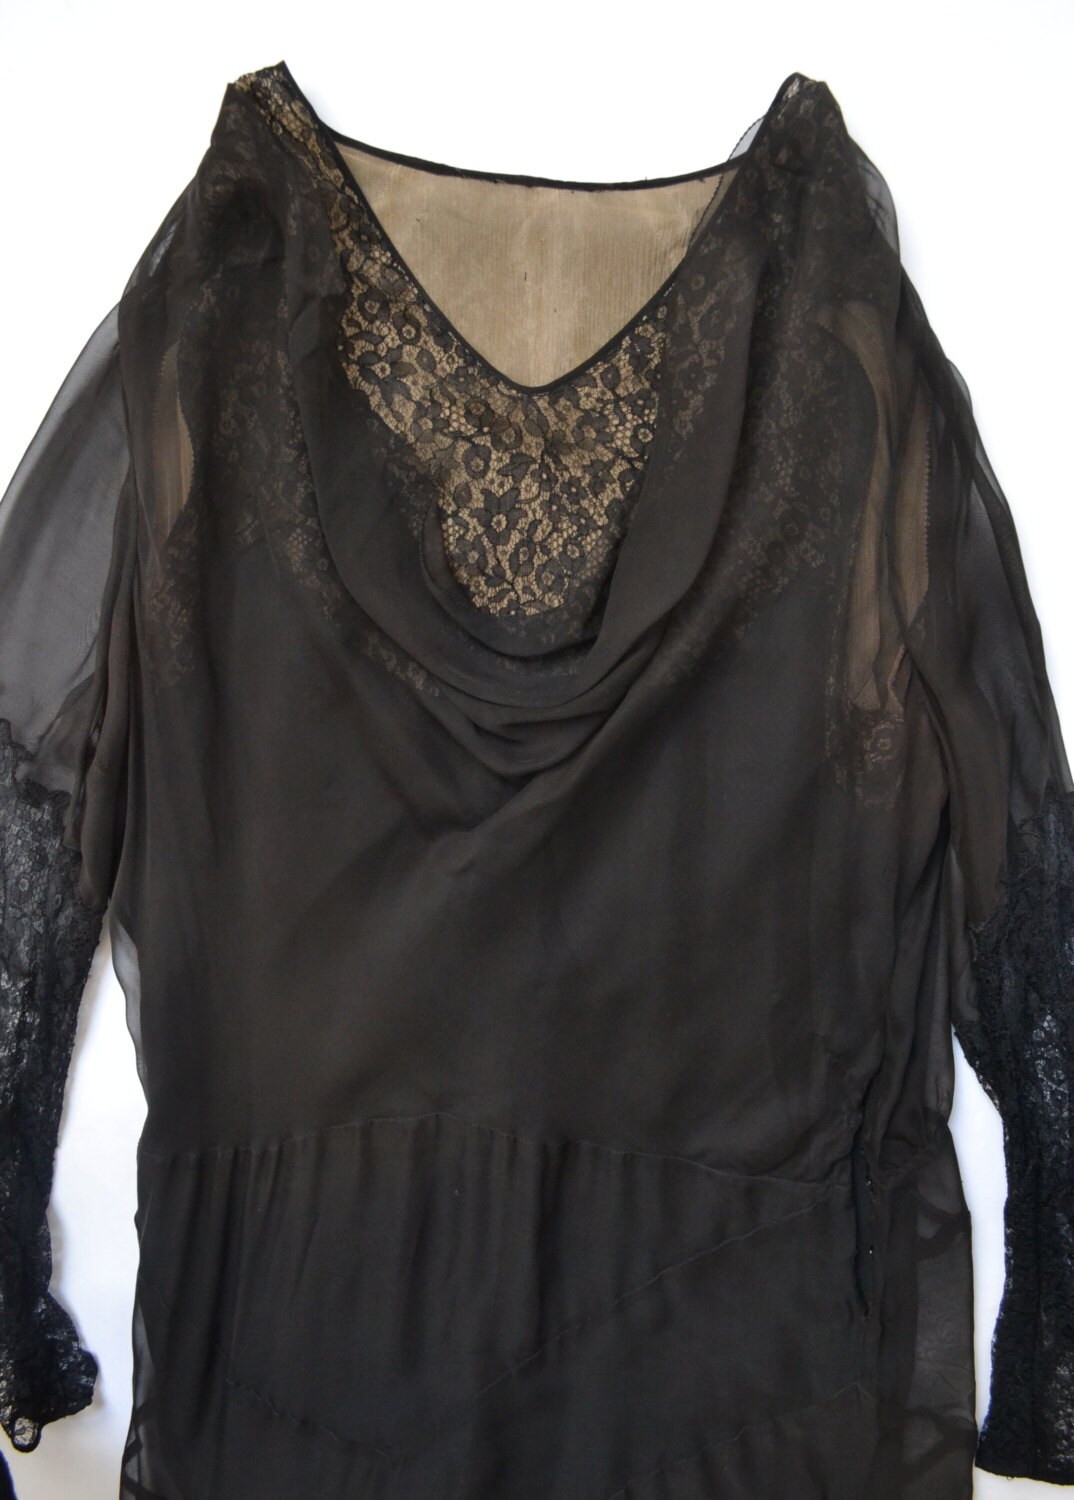 1930s Sheer Black Silk and Lace Dress - Etsy